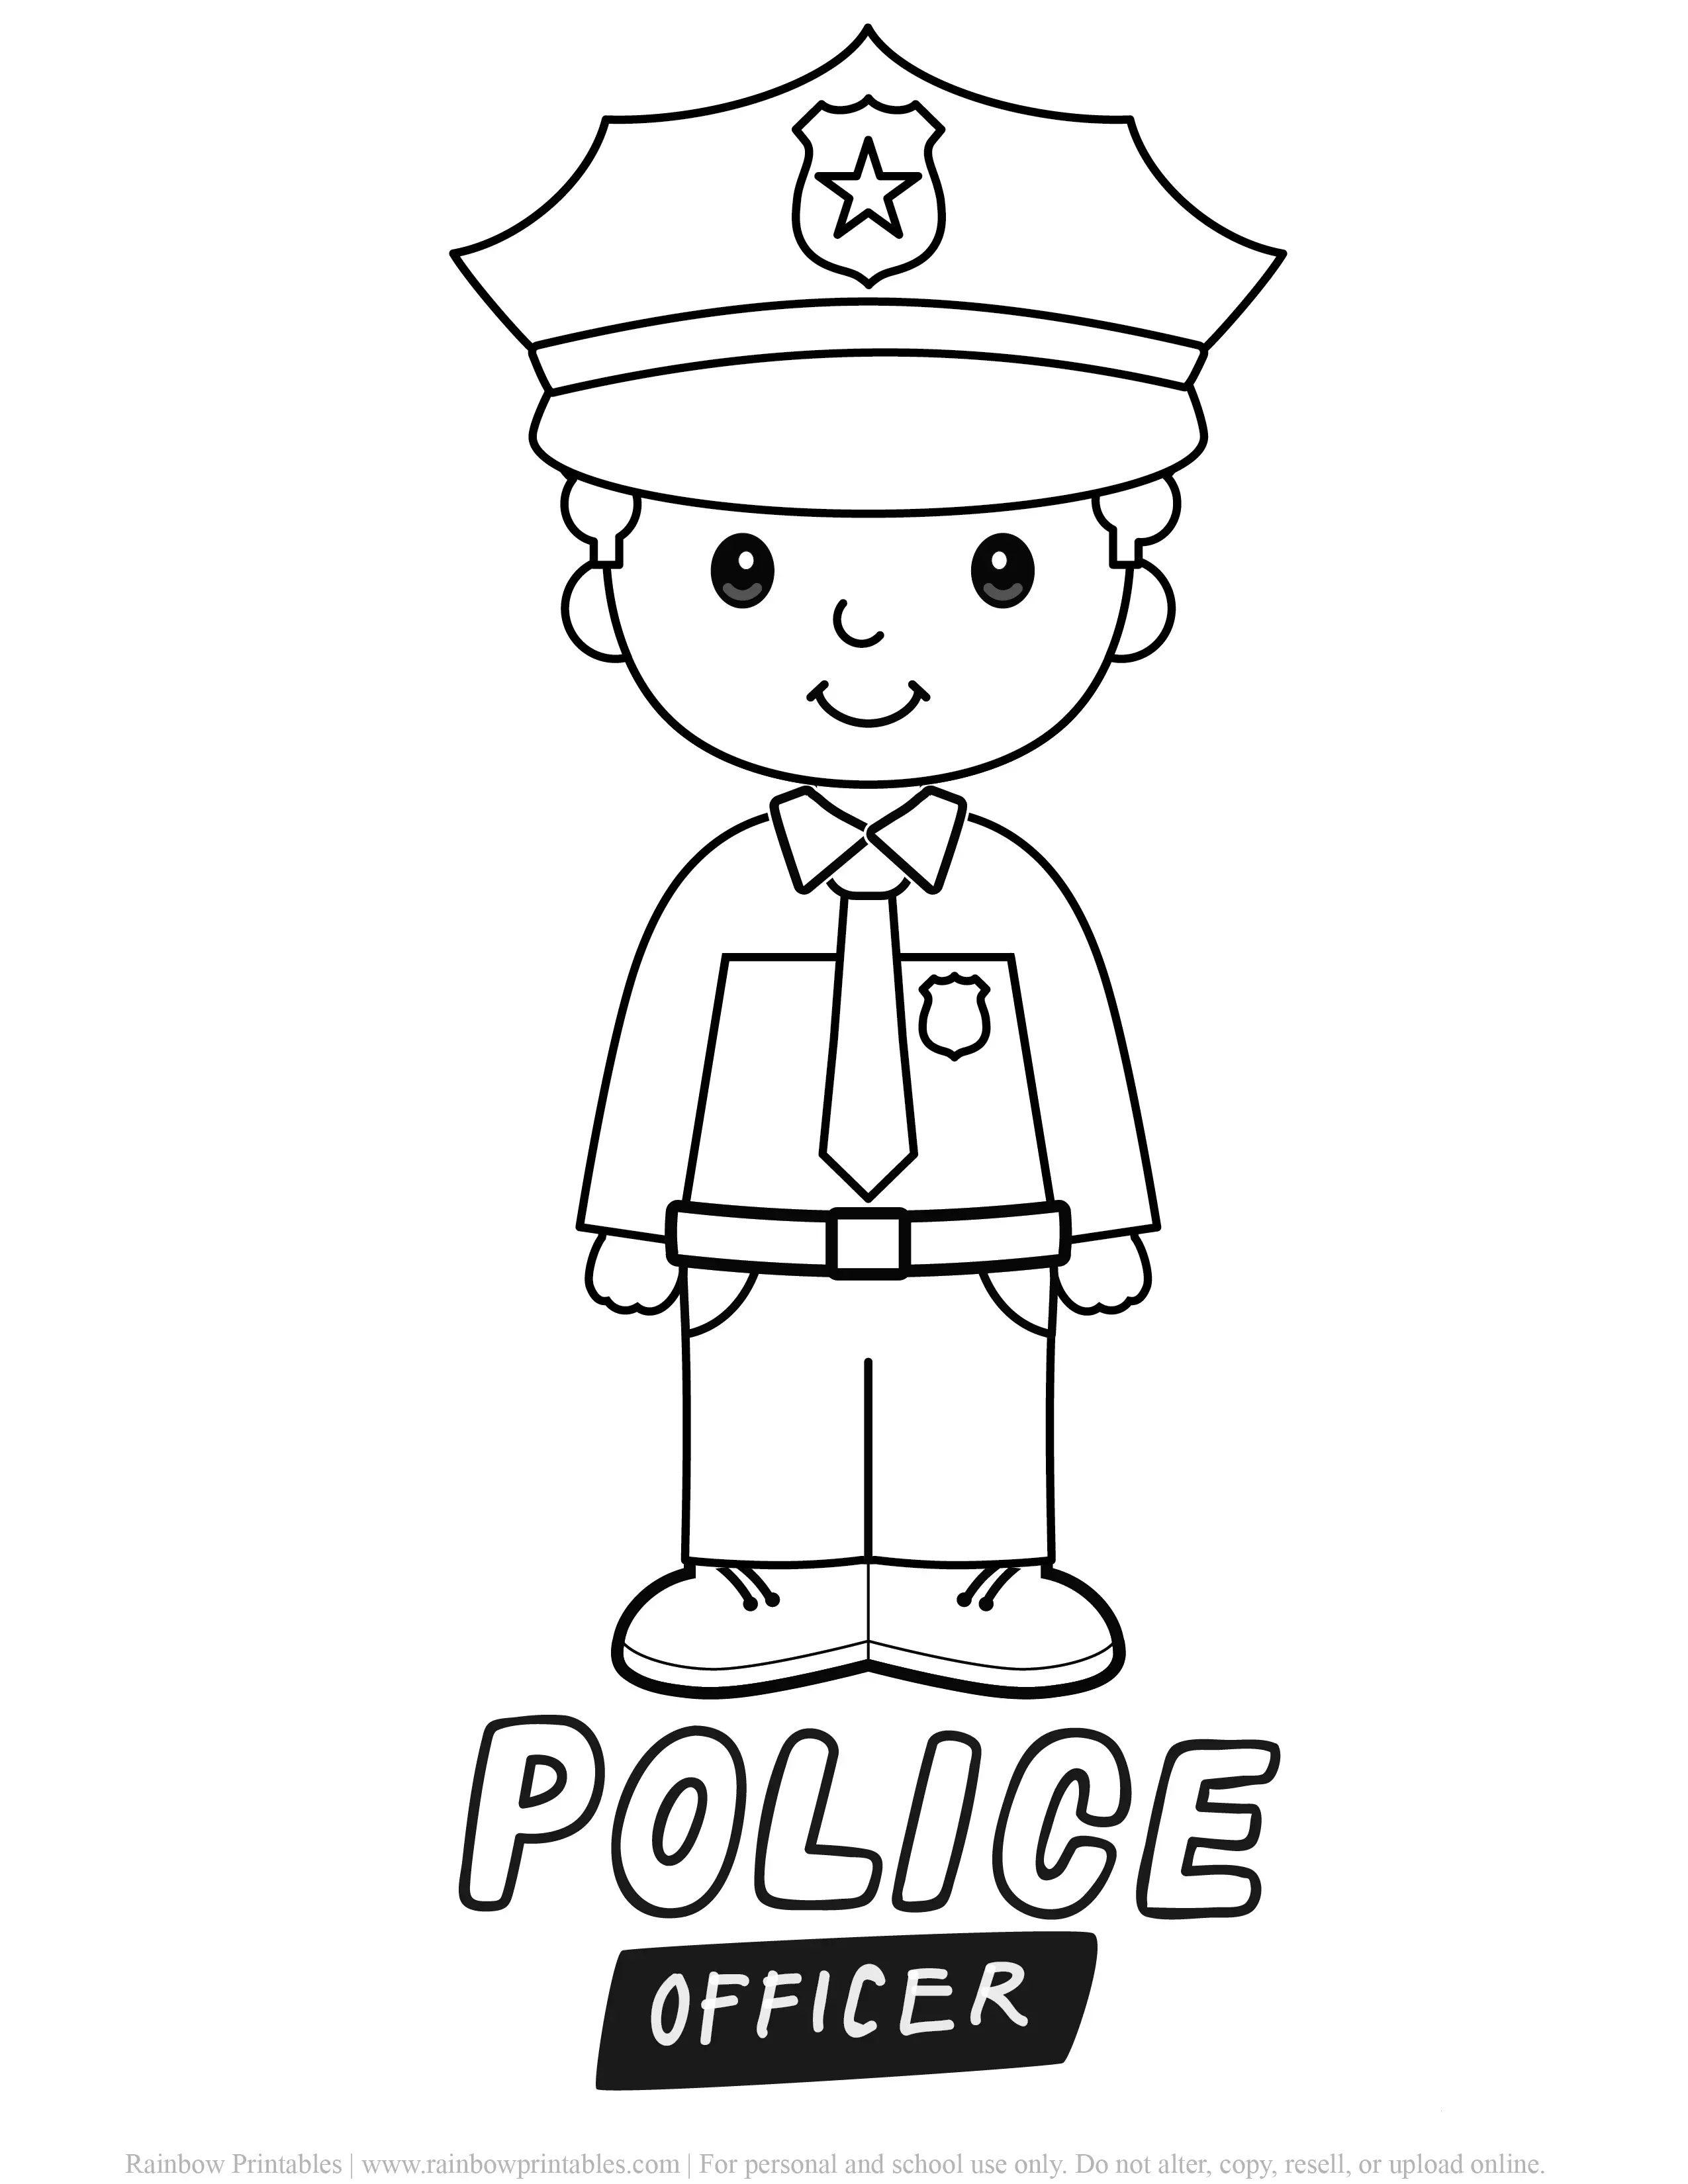 Community Helper Coloring Page Simple Young Kids Clipart Illustration Male Police Coloring Sheet Officer in Uniform Cop Hat